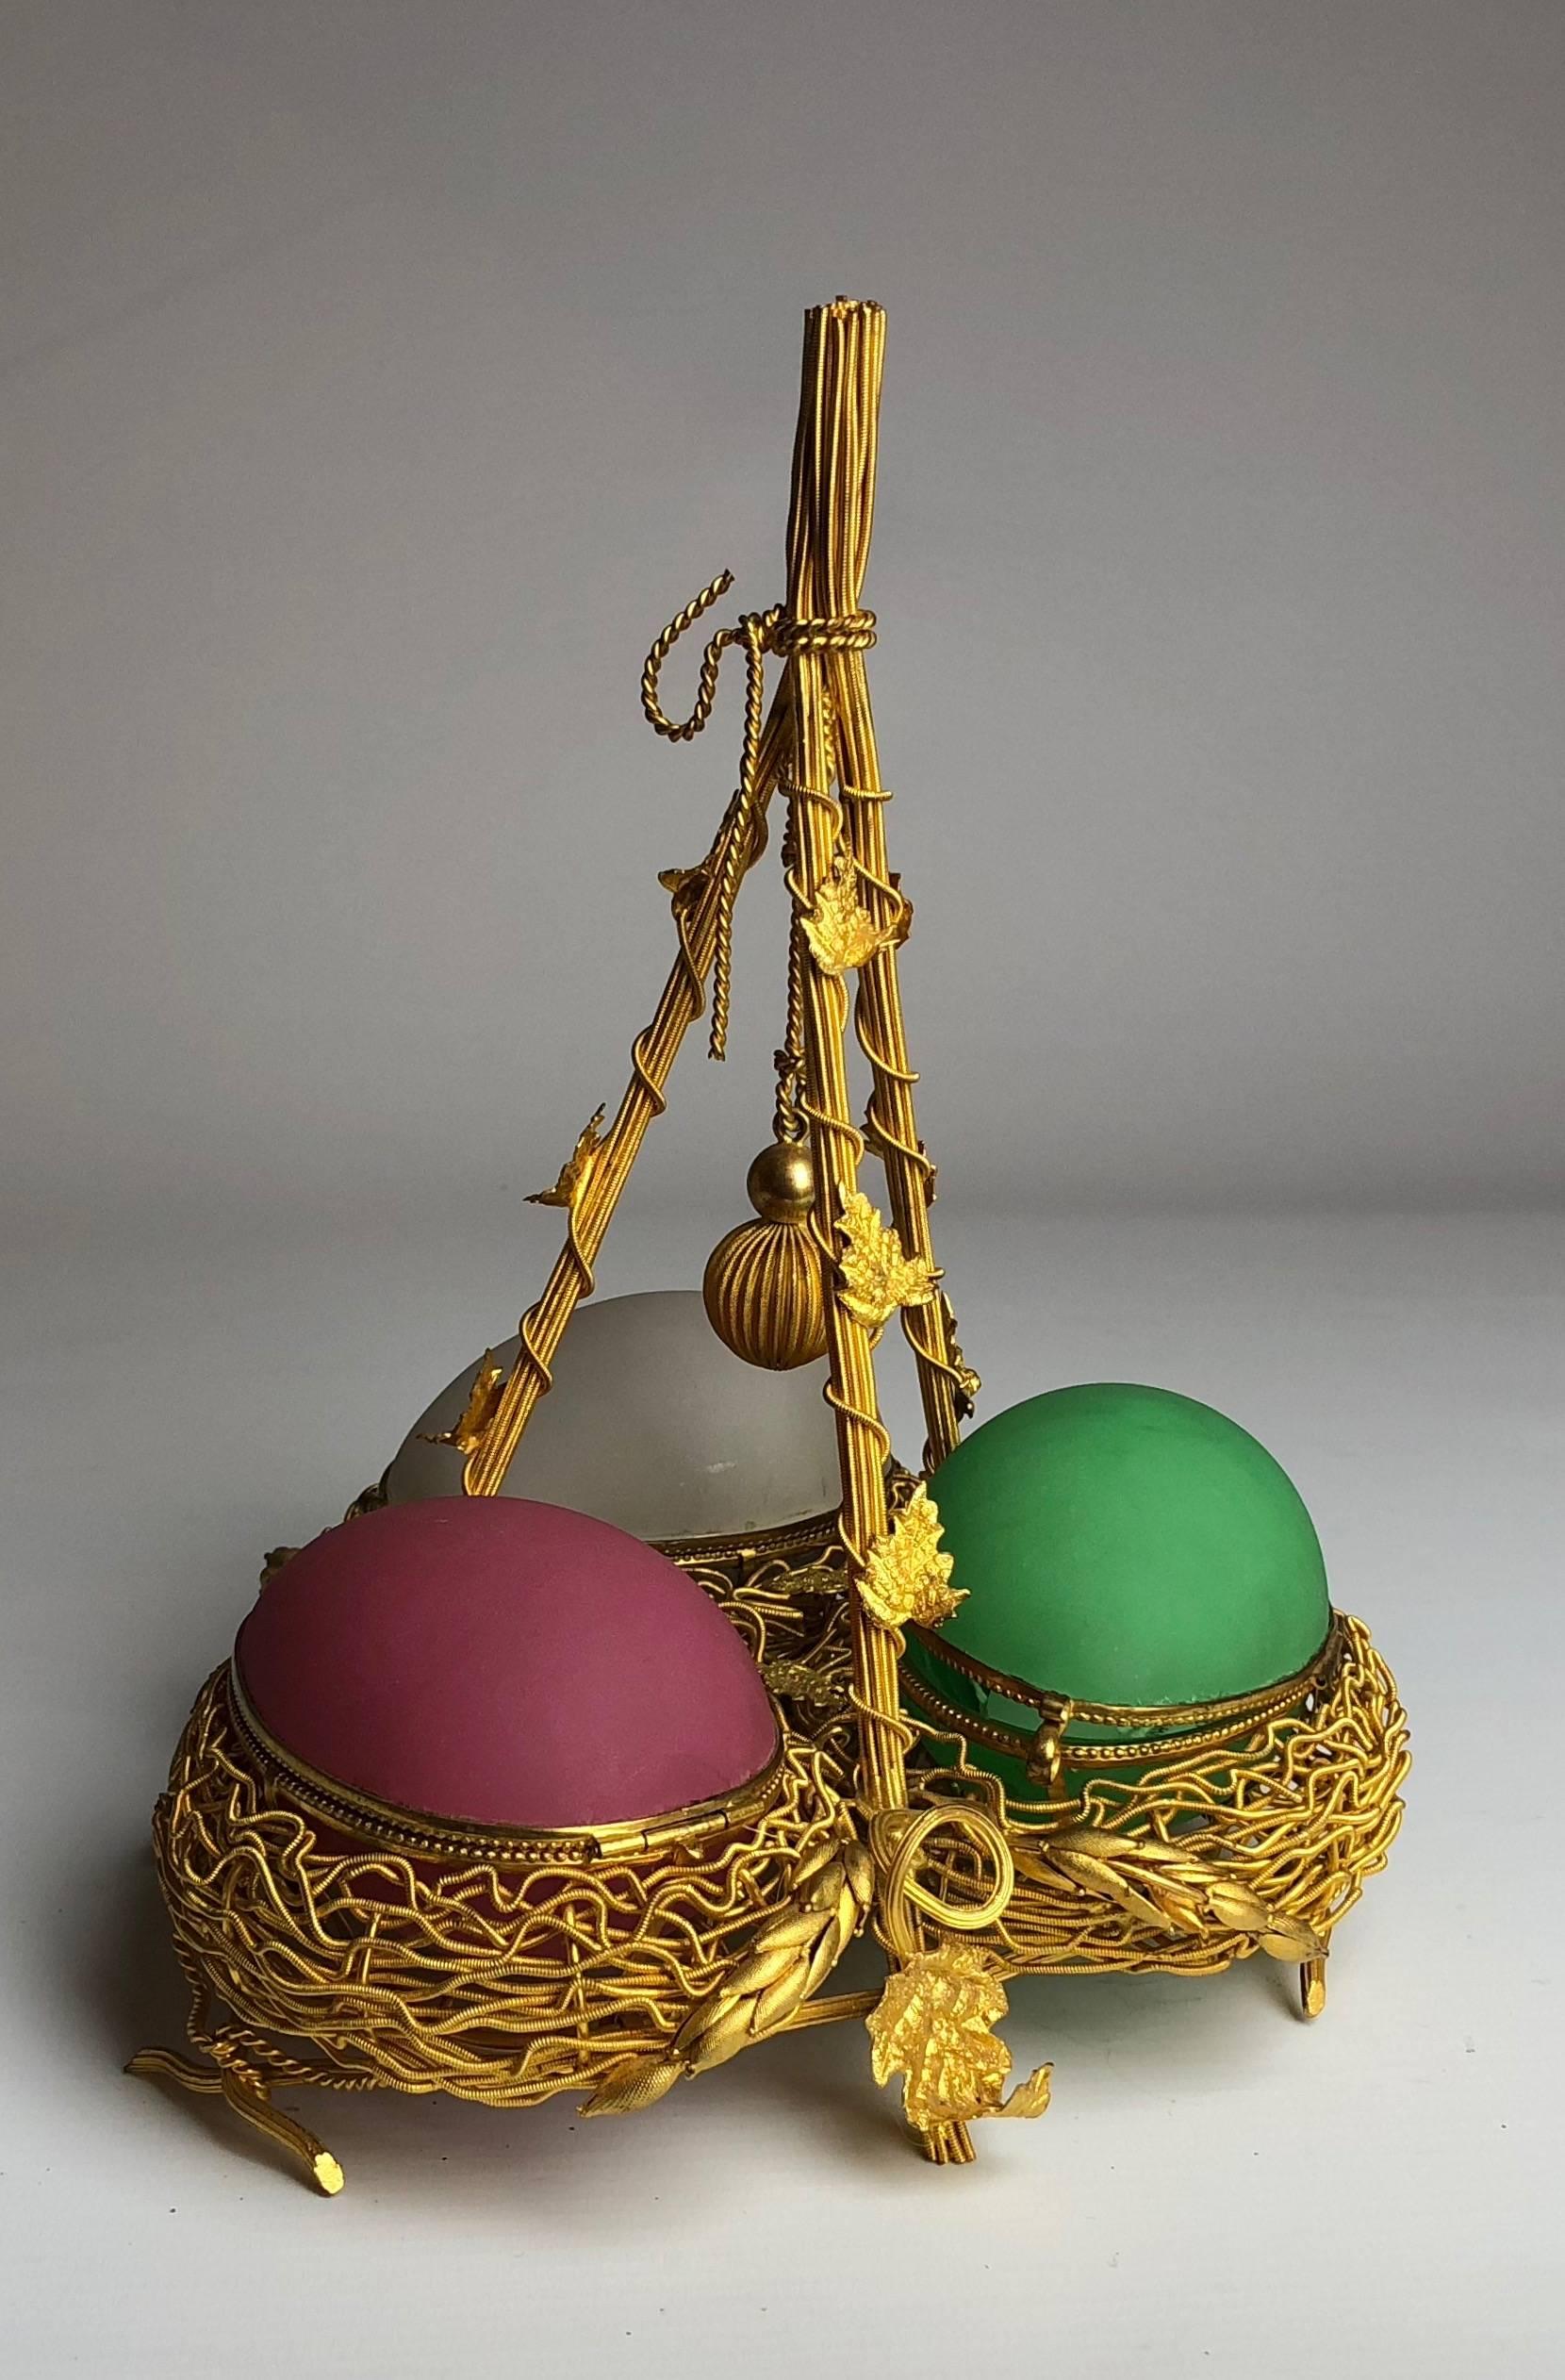 This fantastic piece of Palais Royale would be best described as a ladies companion, each of the eggs opens, one is left empty to place rings etc. in, another is fitted with a small sewing set and the final egg holds a perfume bottle.

France,